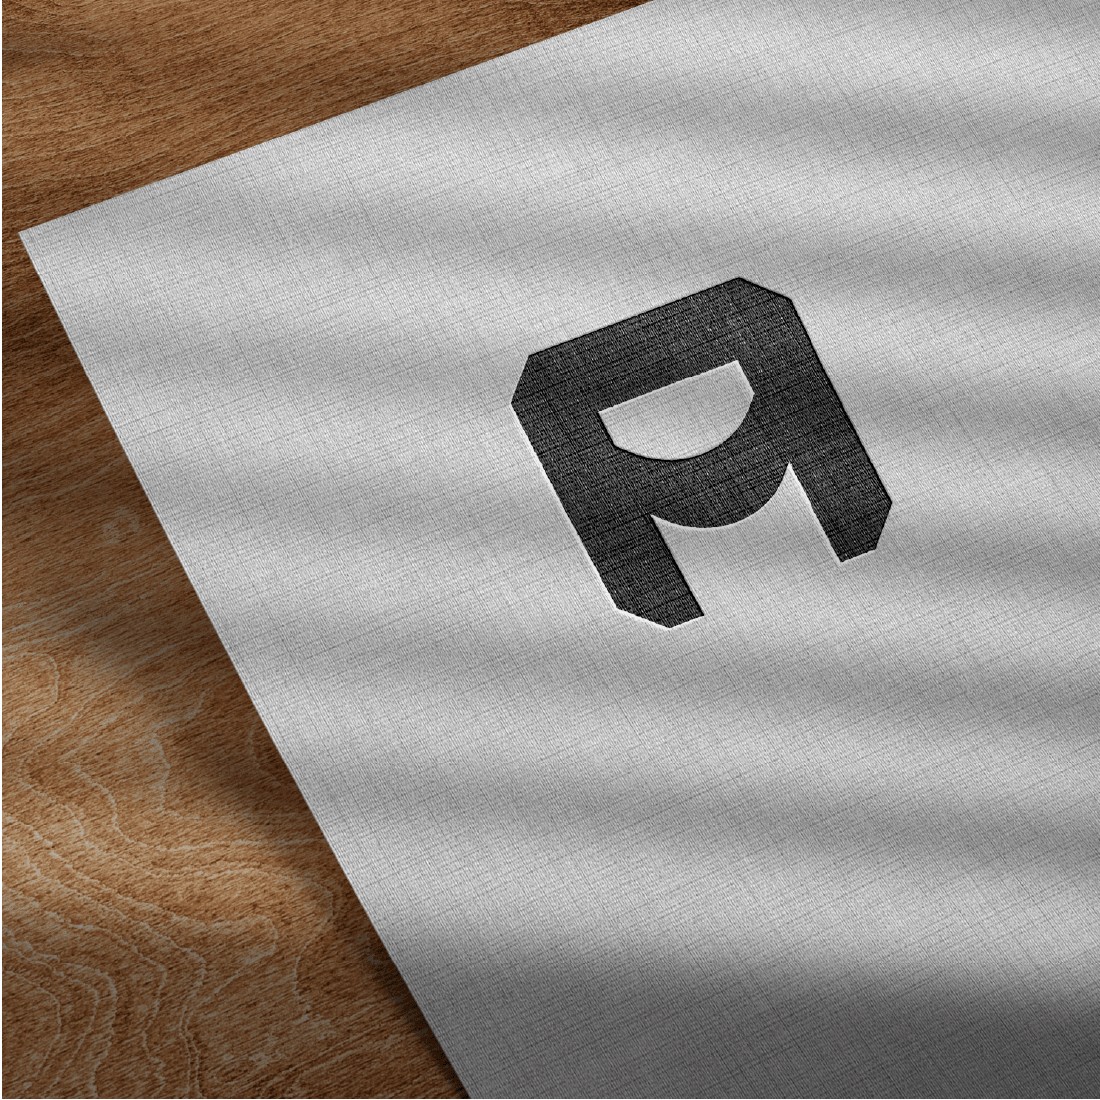 White paper with letter logo.